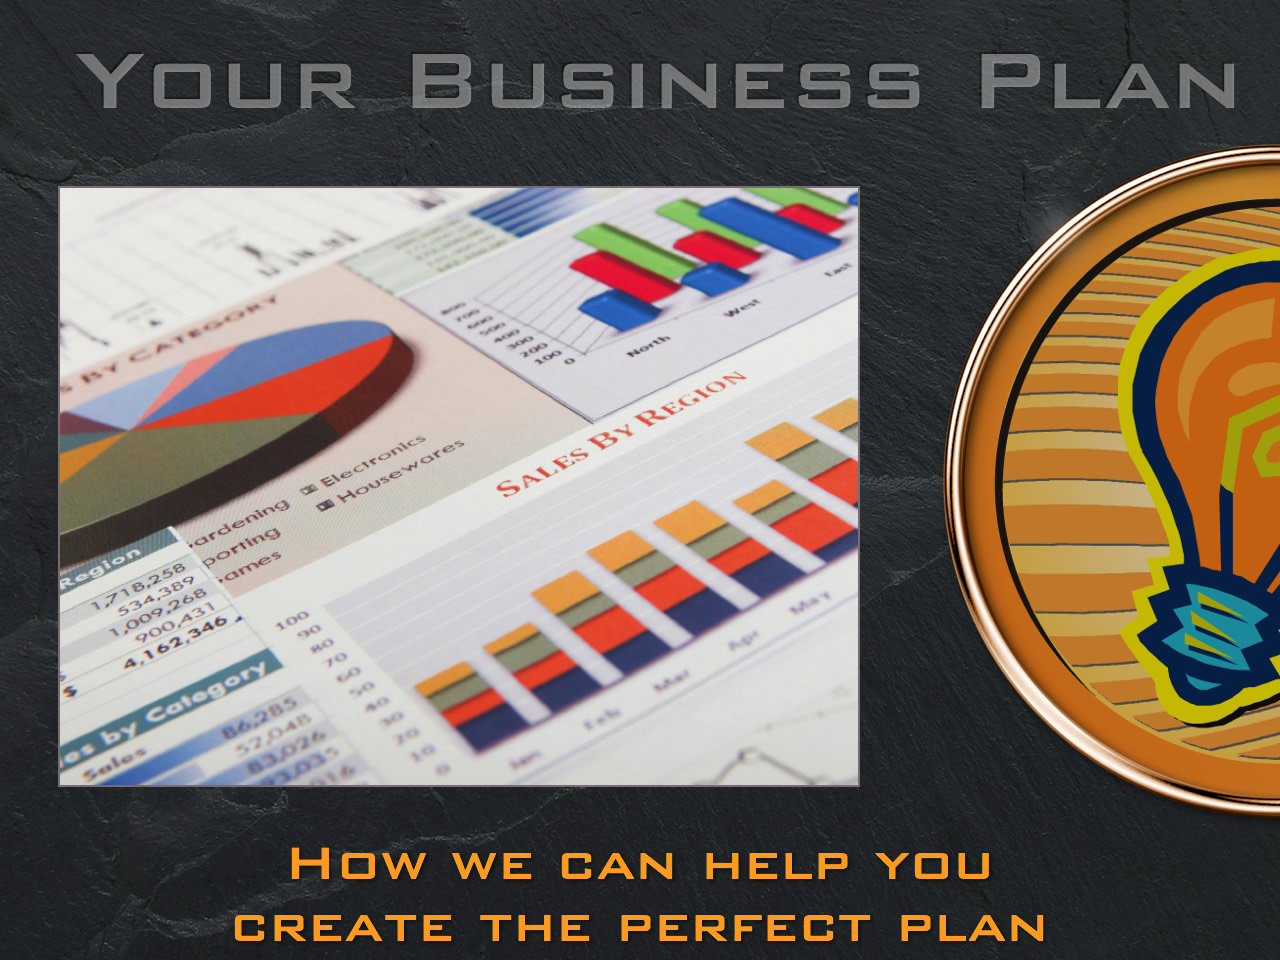 Creating a high quality strategic business plan